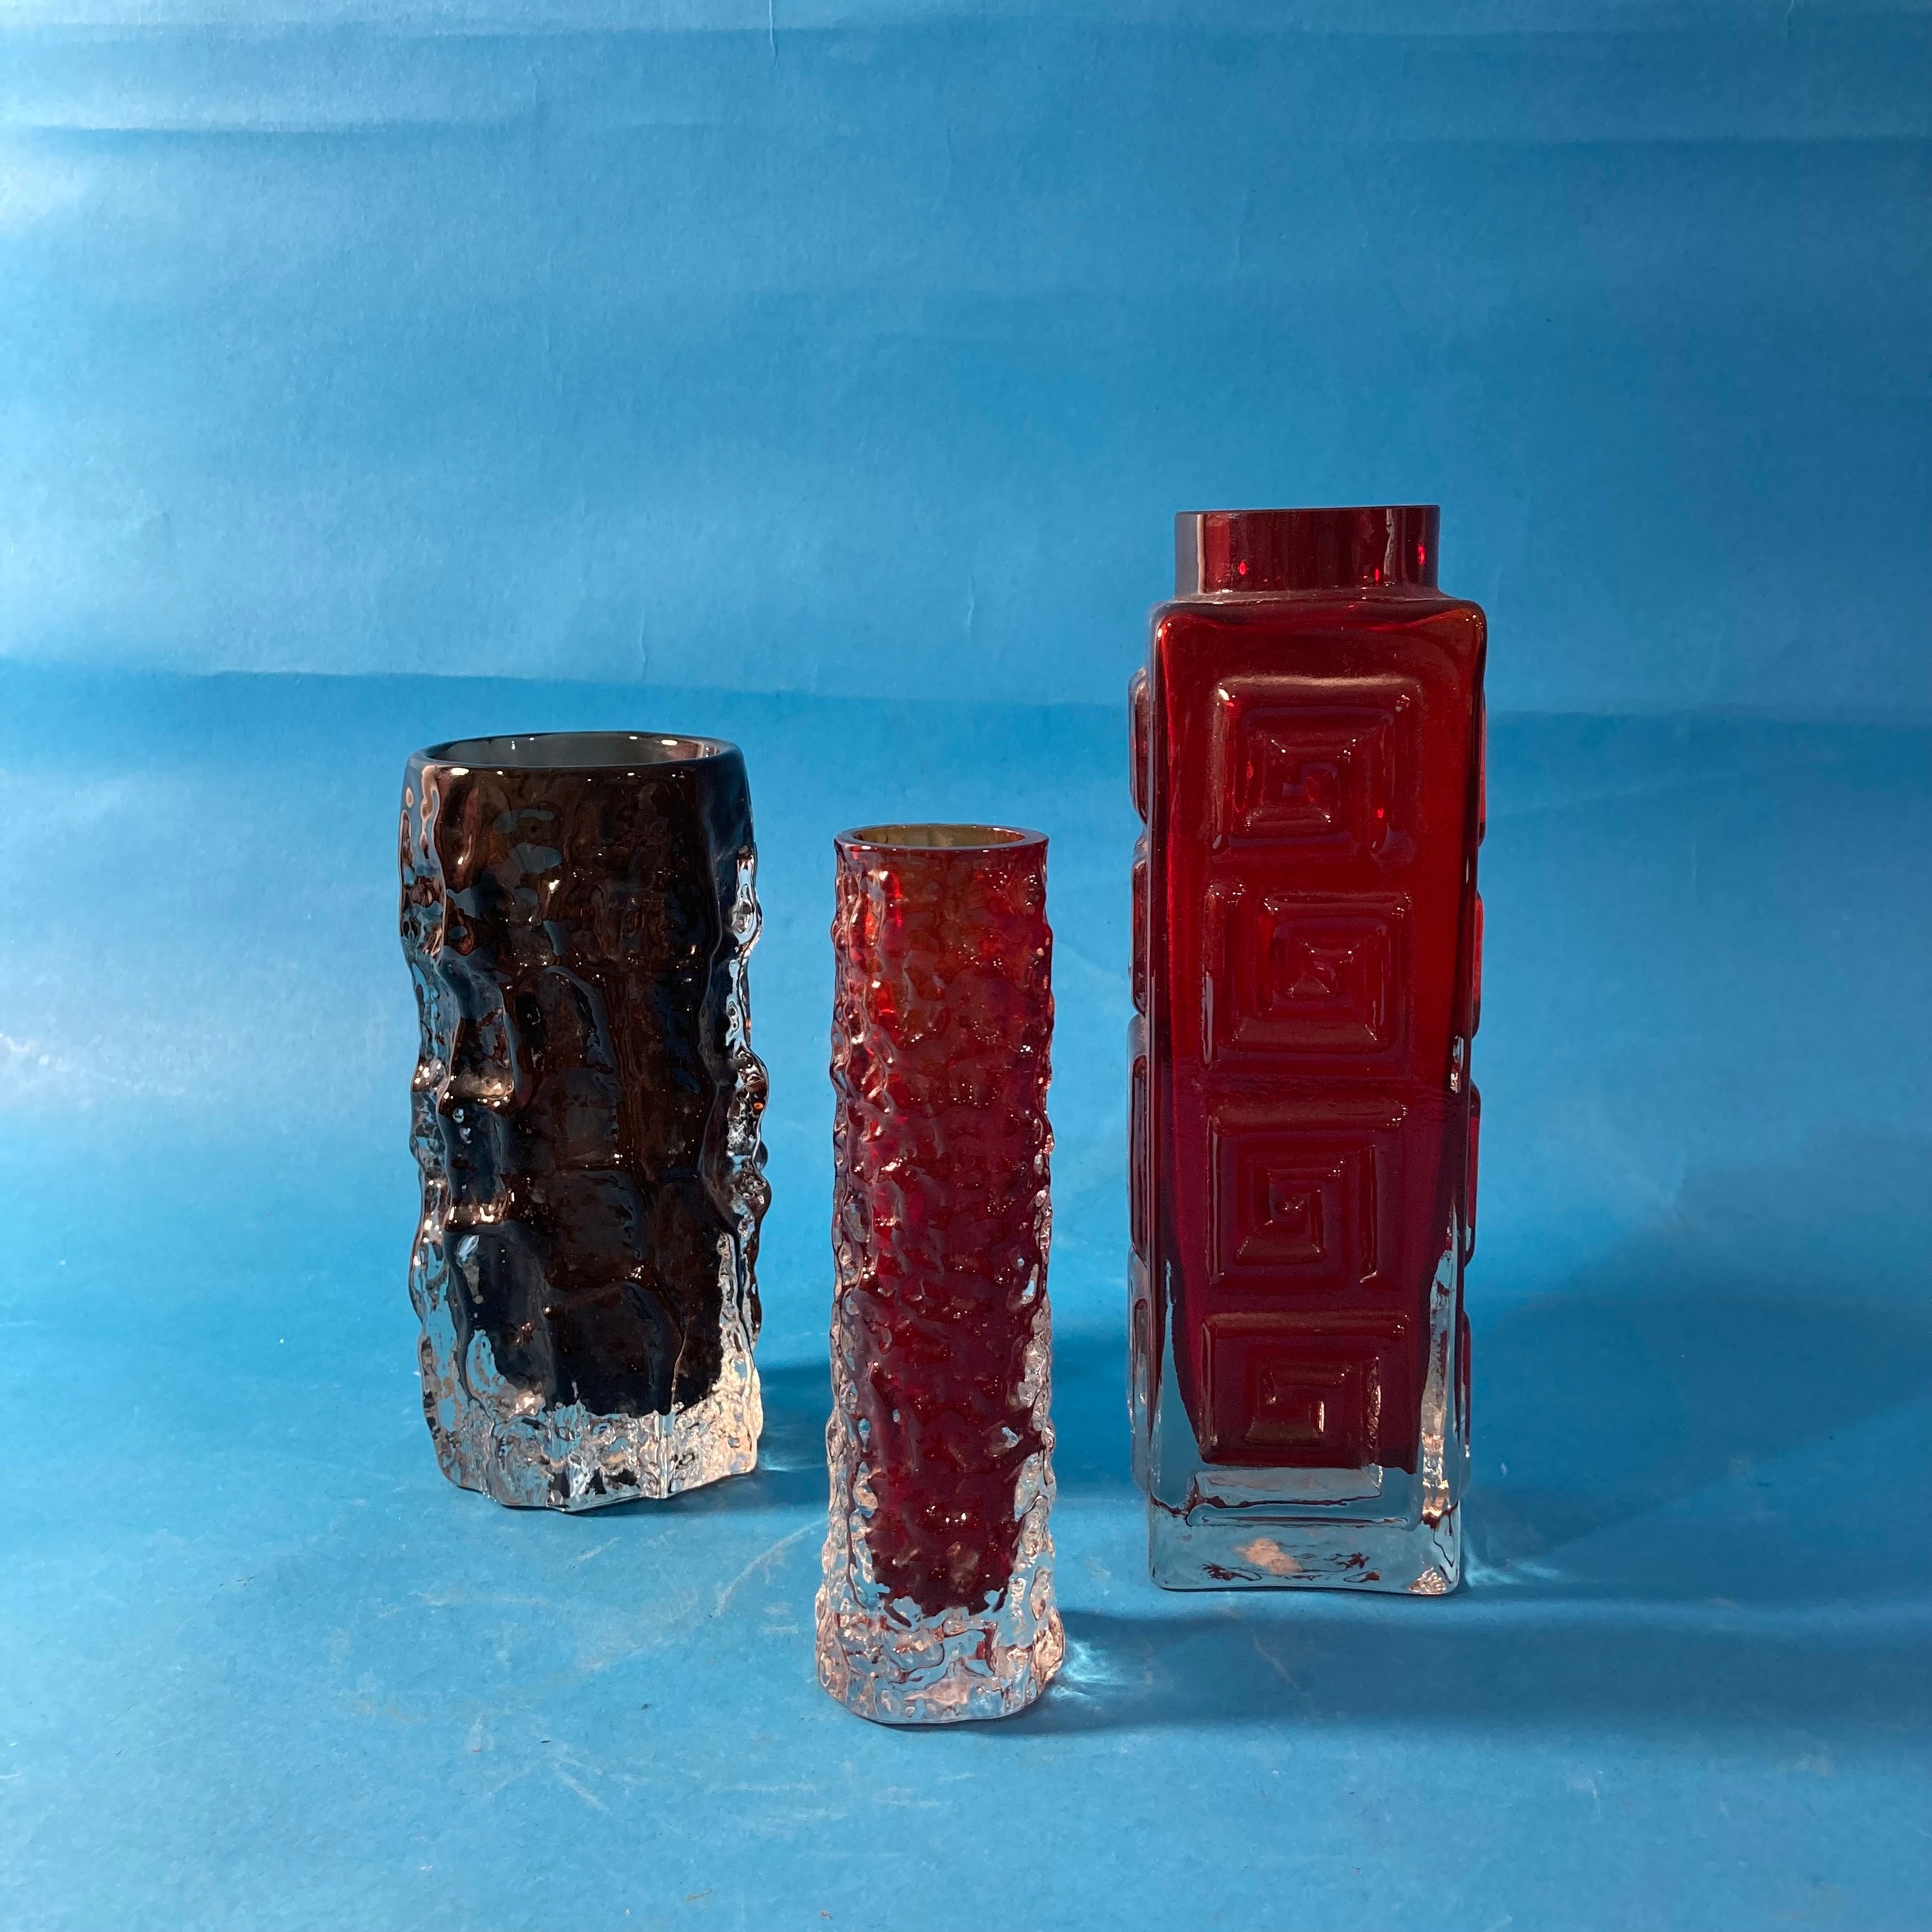 A Geoffrey Baxter for Whitefriars 'Greek Key' pattern glass Vase, in Ruby Red, 20cm tall, together